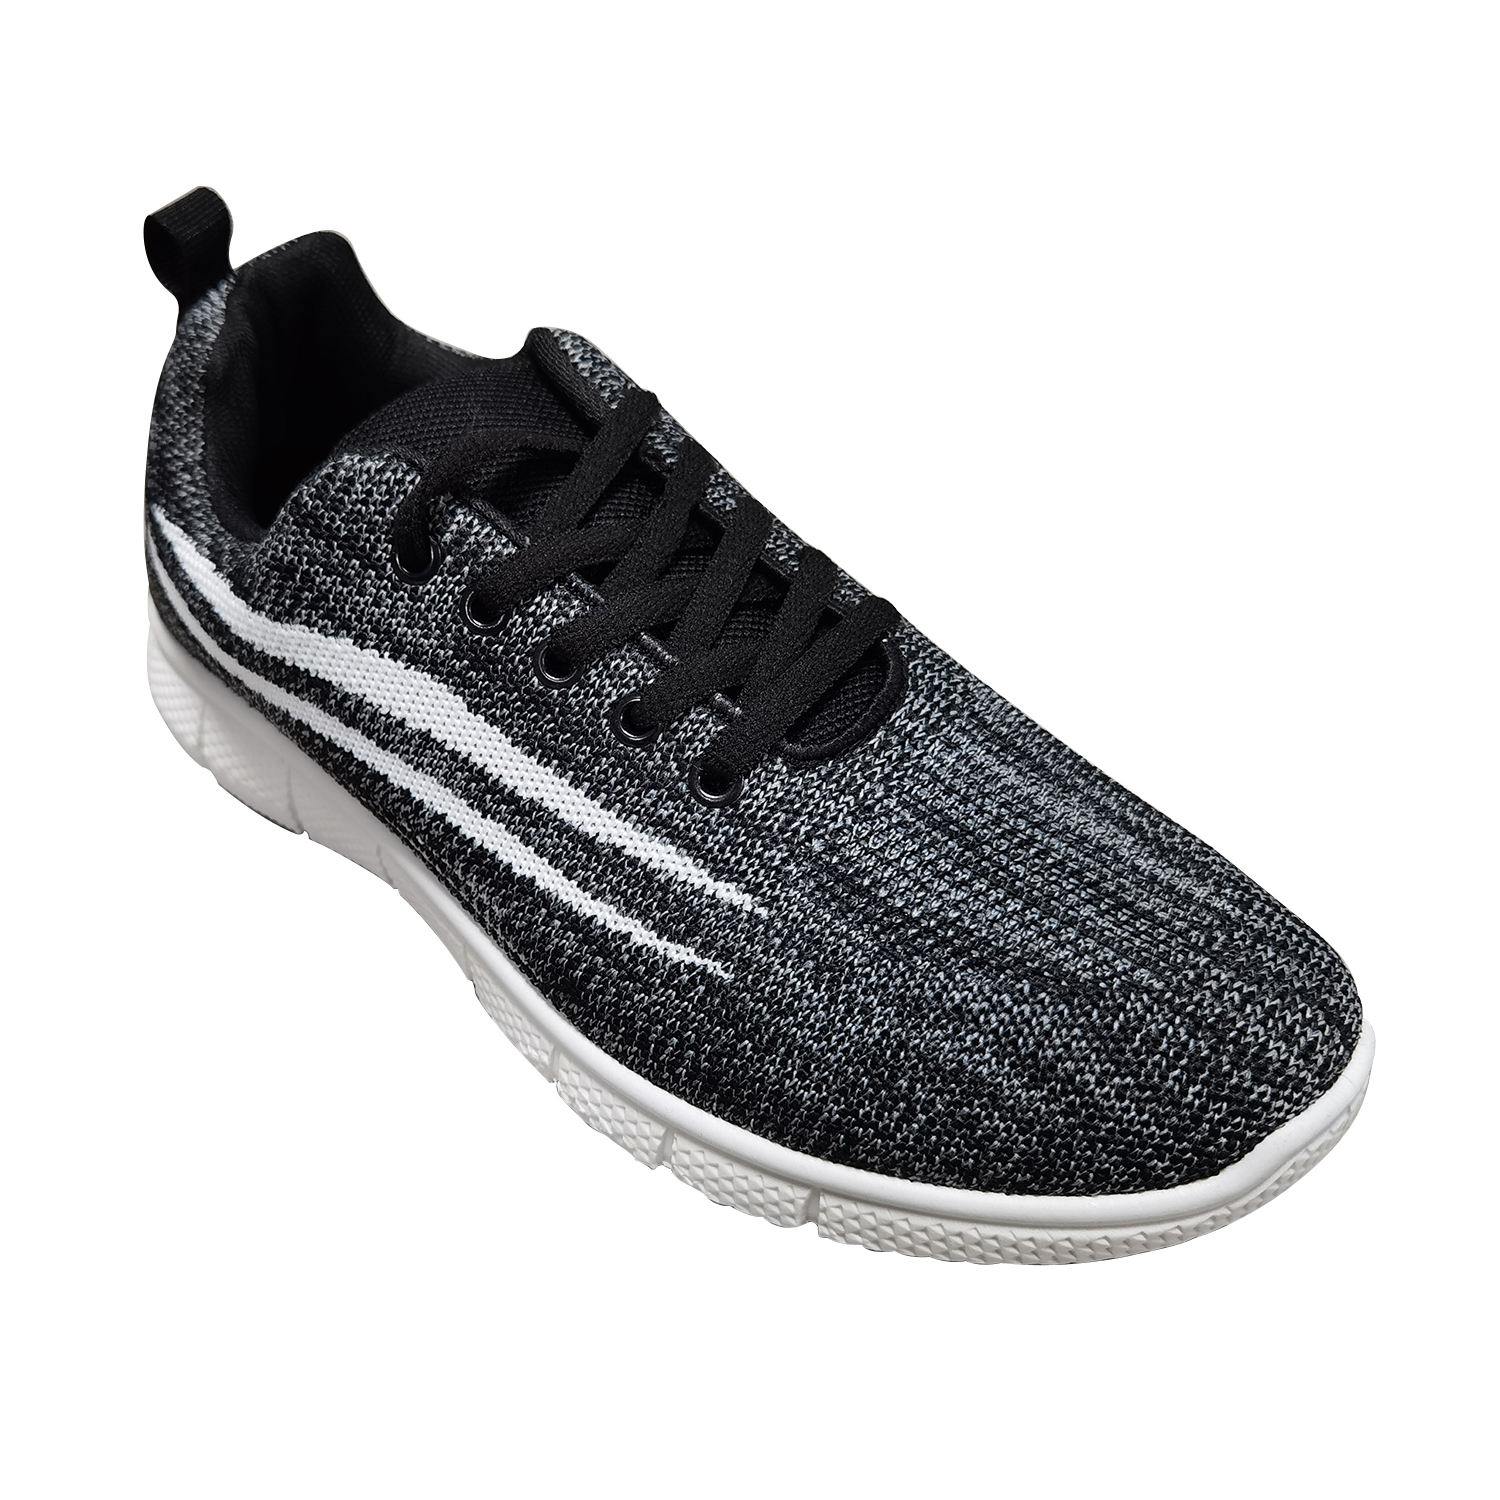 Men's Fly Knitted Sneakers Breathable Walking Tennis Running Shoes Slip on Casual Fashion Sneakers 